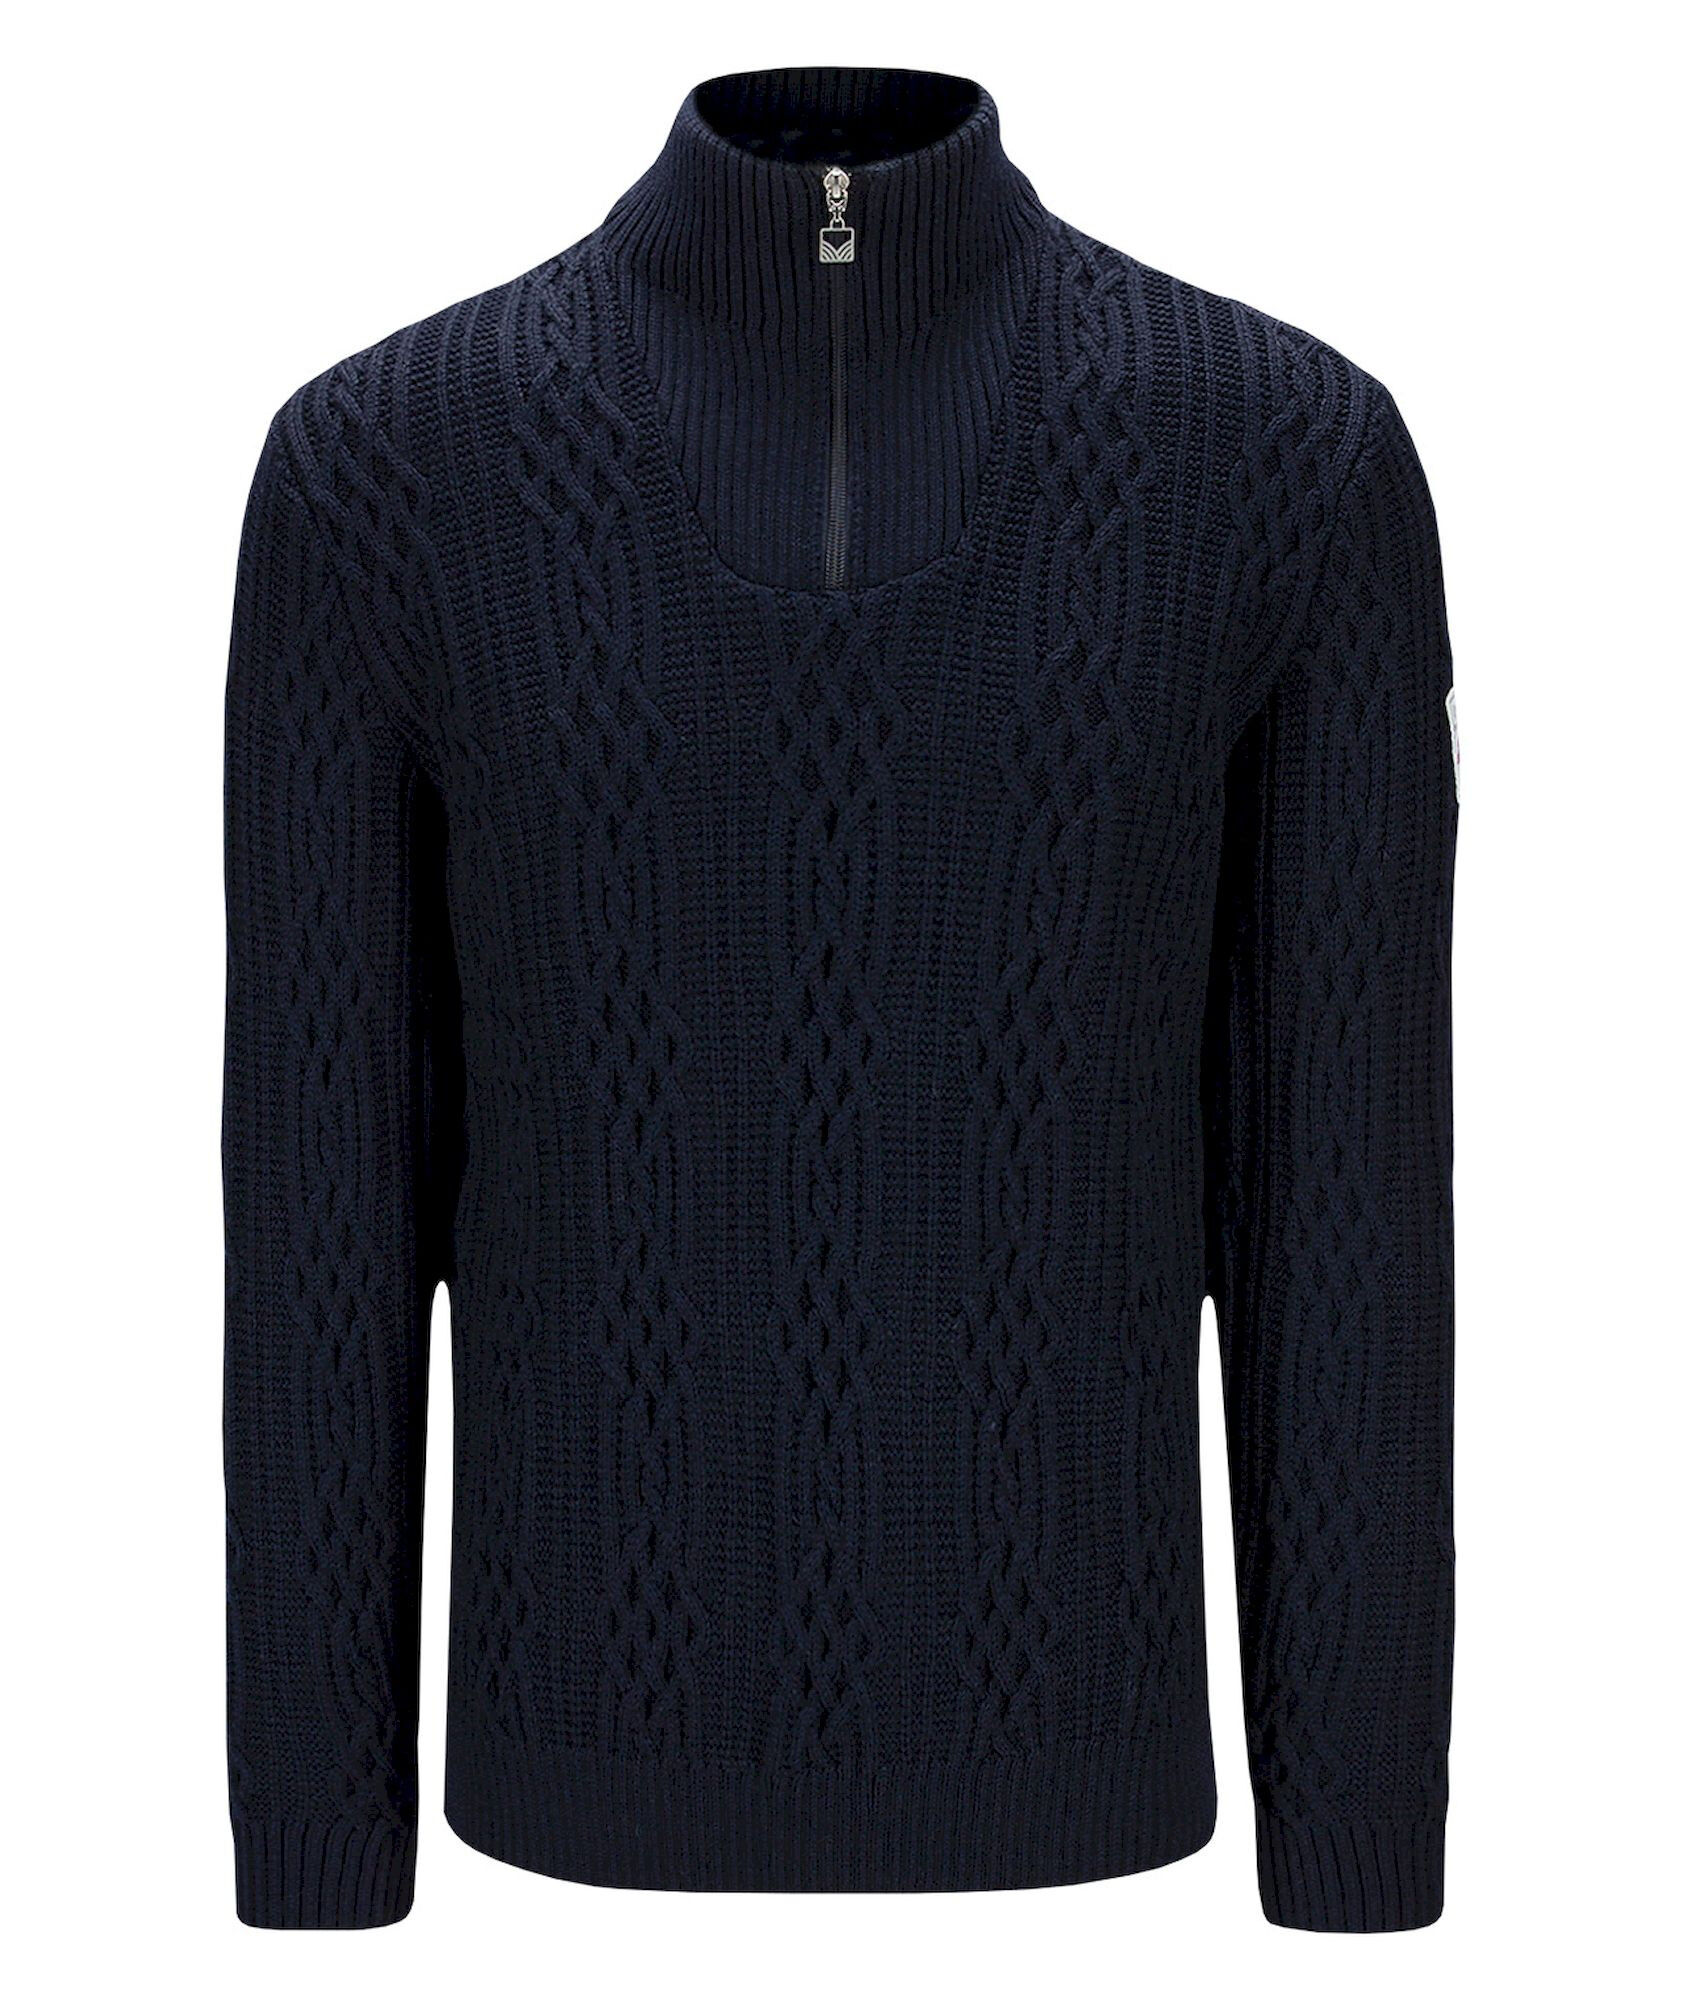 Dale of Norway Hoven Sweater - Pull en laine mérinos homme | Hardloop